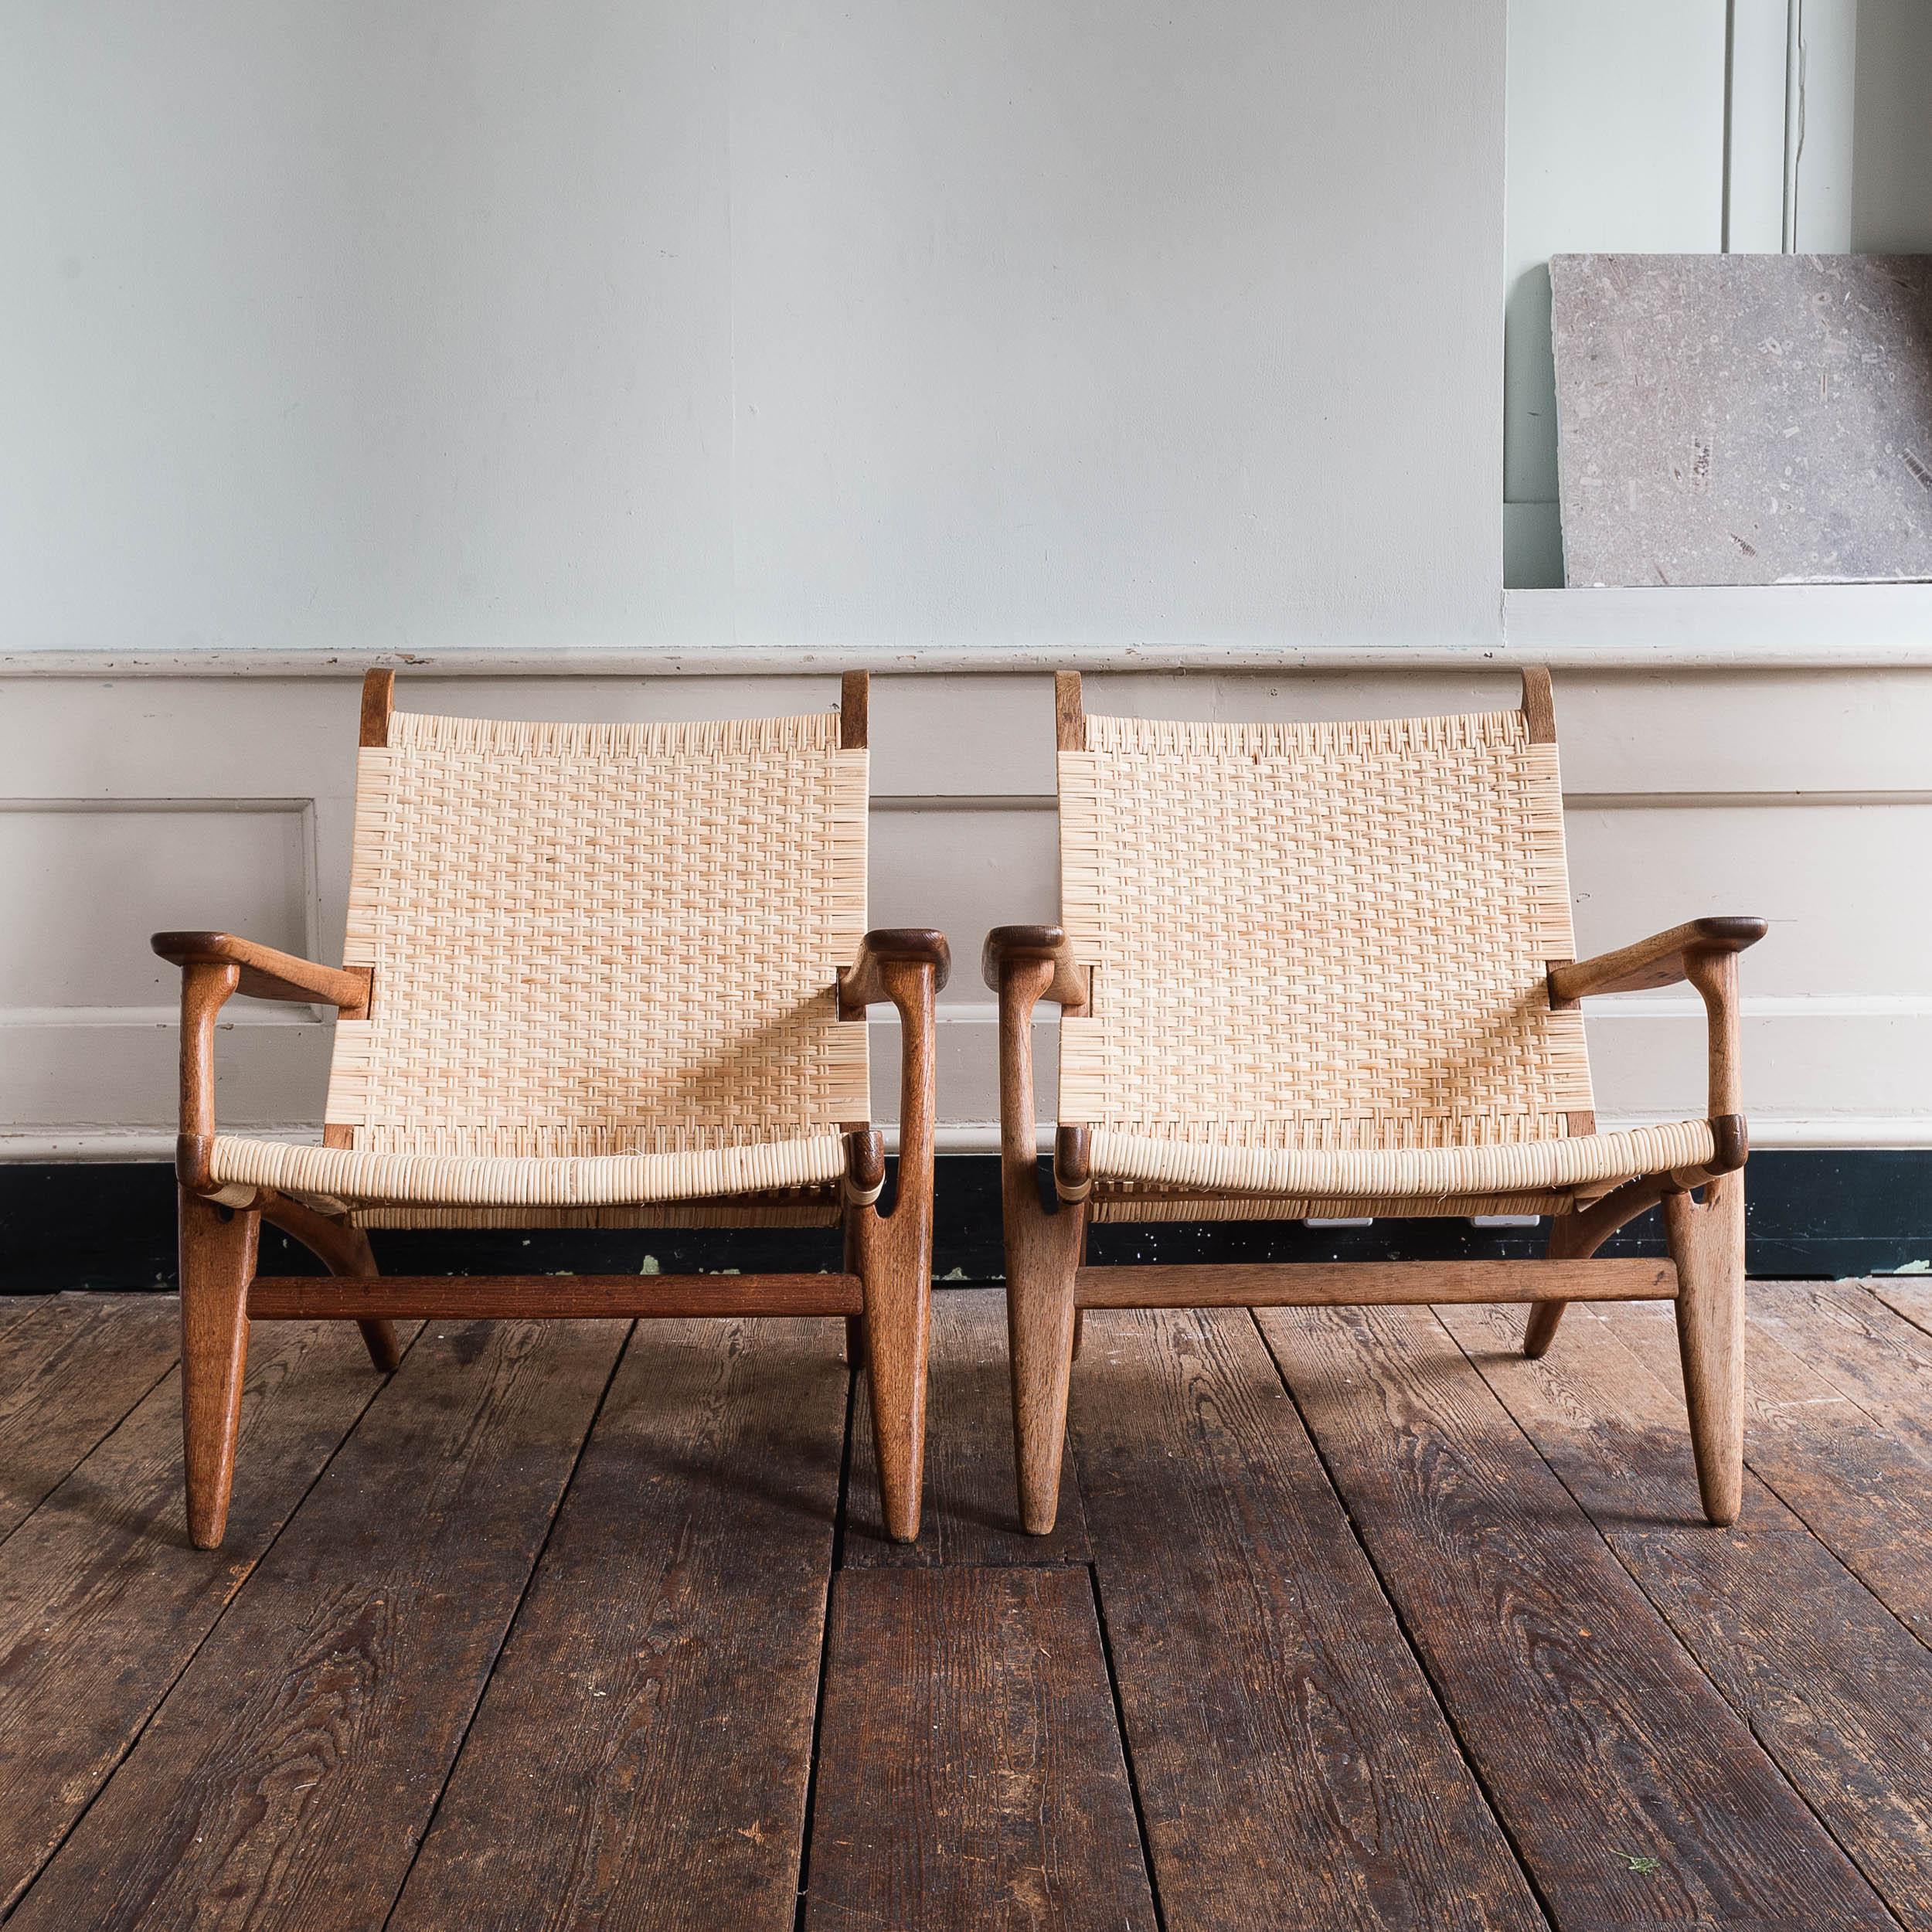 Pair of Hans Wegner CH 27 easy-chairs, designed in 1951, manufactured by Carl Hansen & Son, Denmark.

Oak frames, seat and backrests re-caned to the original specification. 

Rare pair of early 1950s examples of the model. Chair frames in